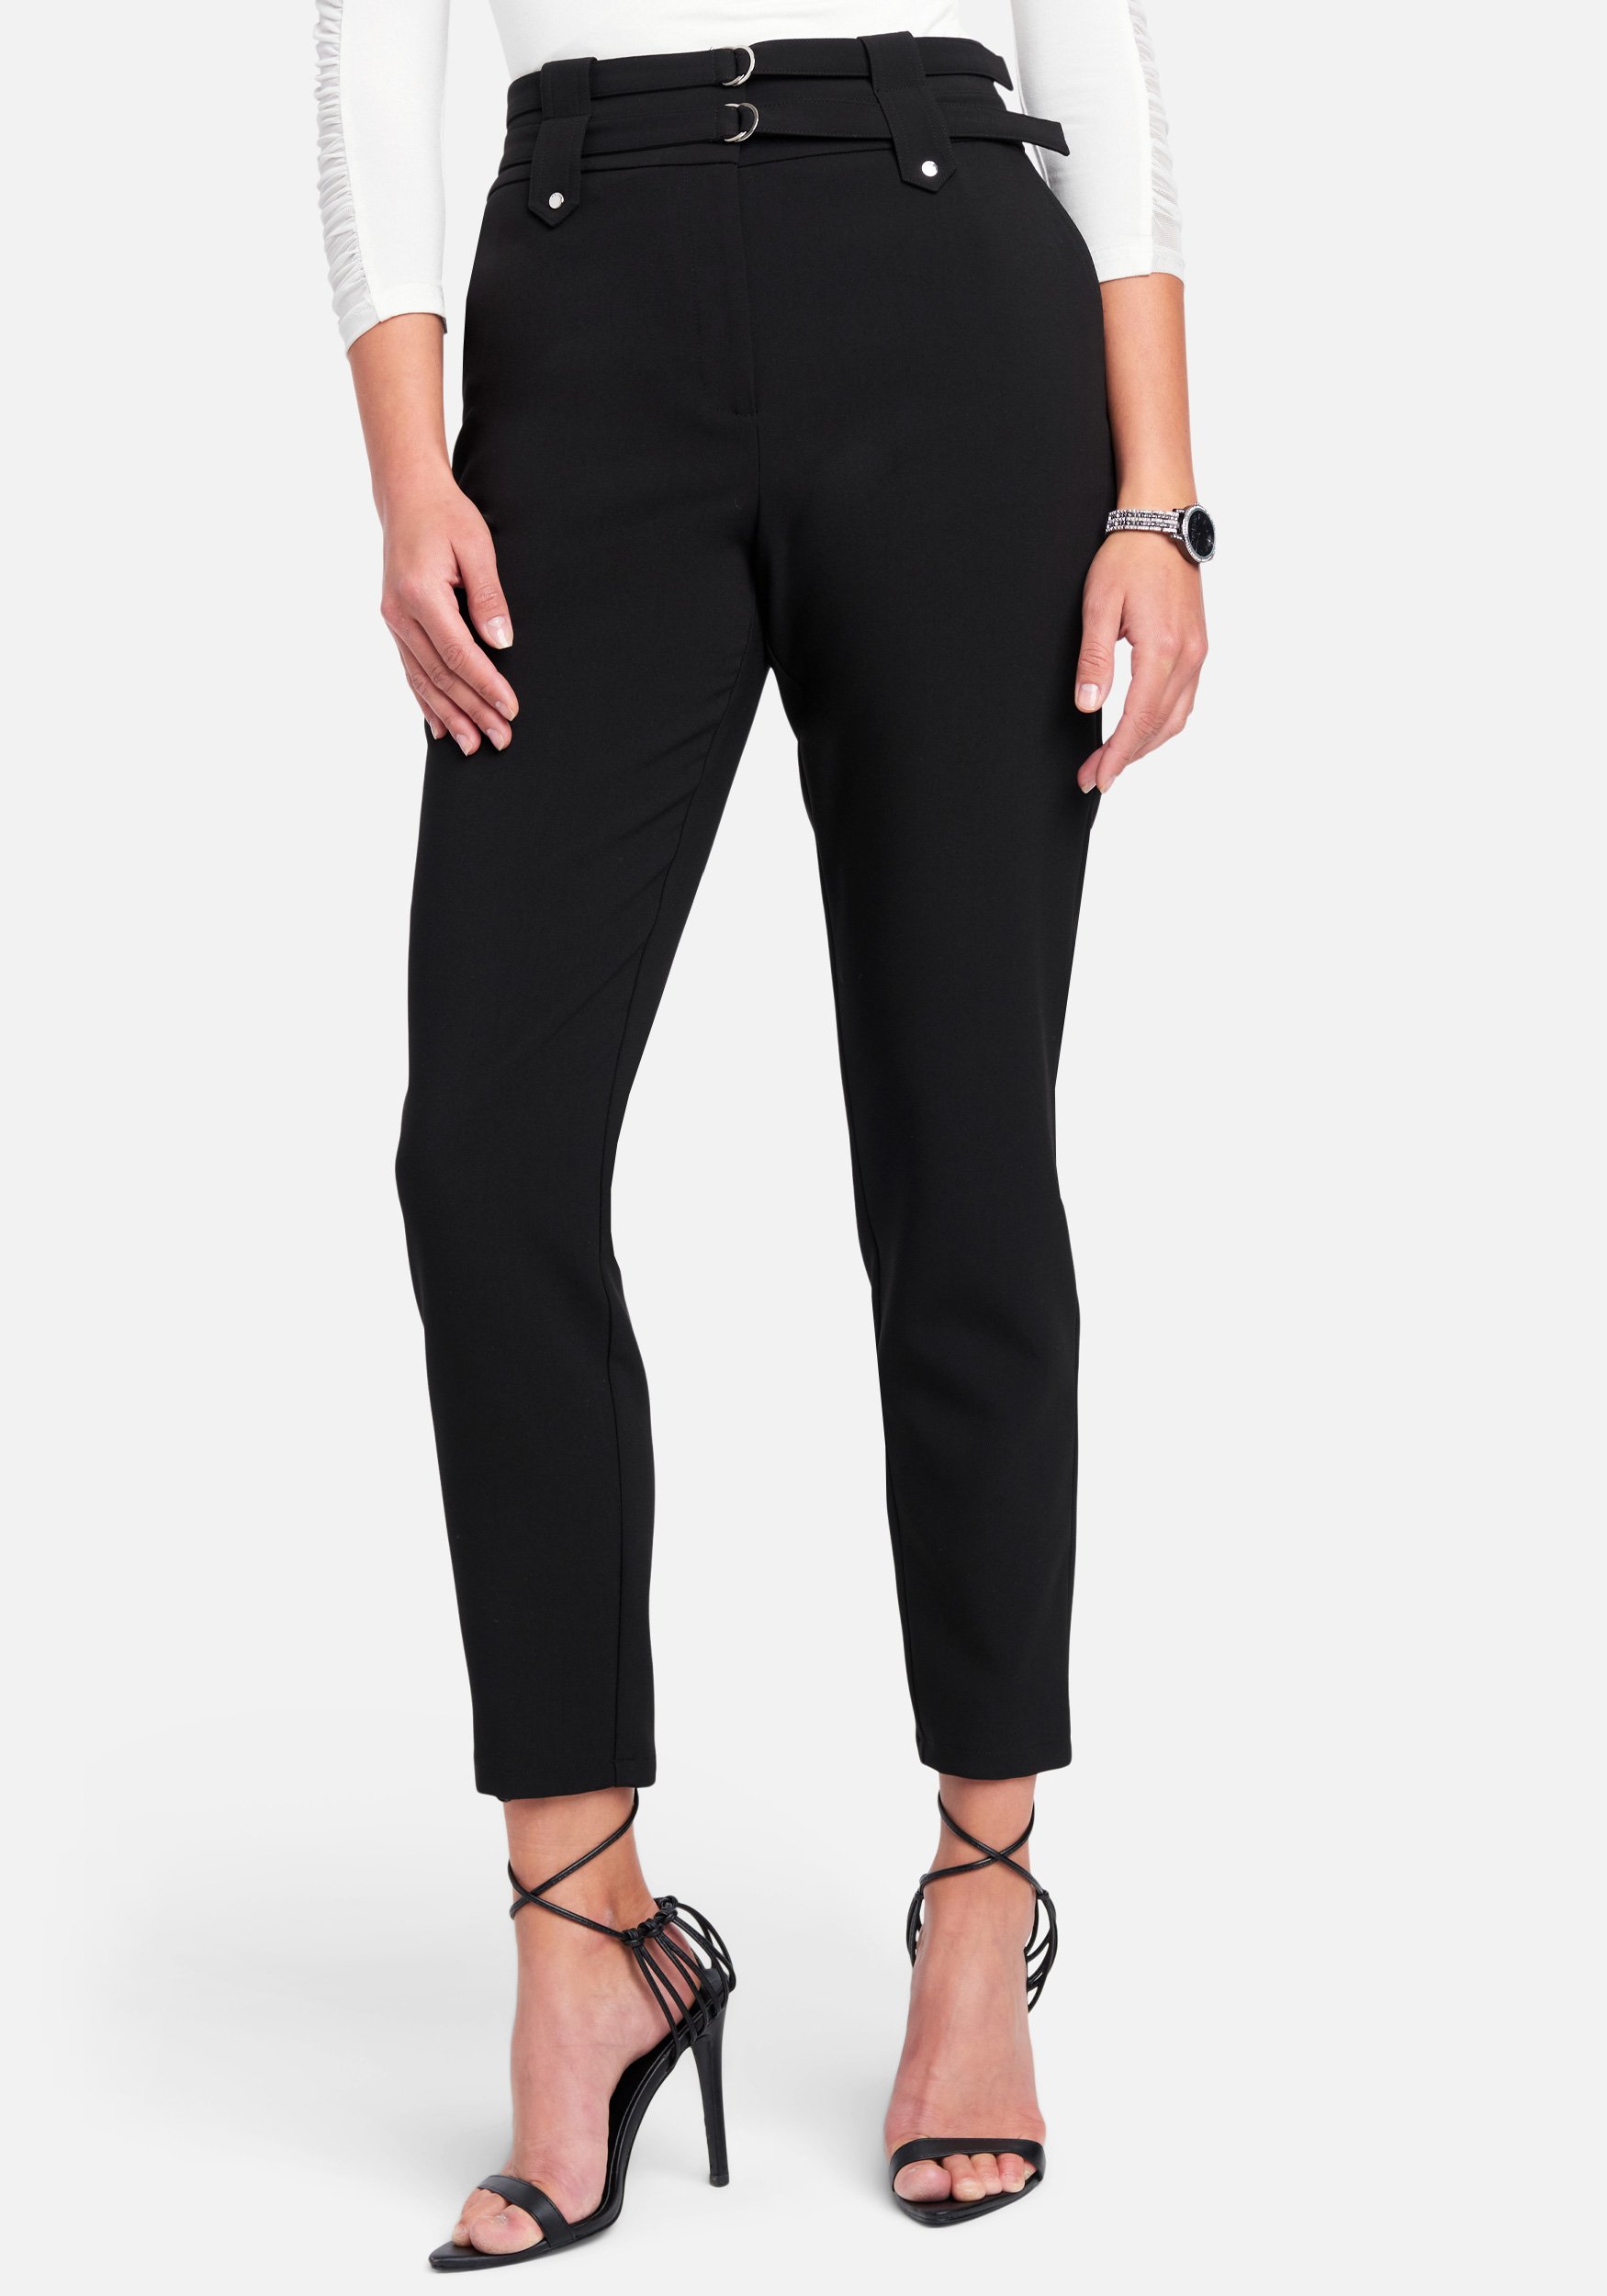 Bebe Women's Double Banded Stretch Twill Pant, Size 2 in Black Spandex/Viscose